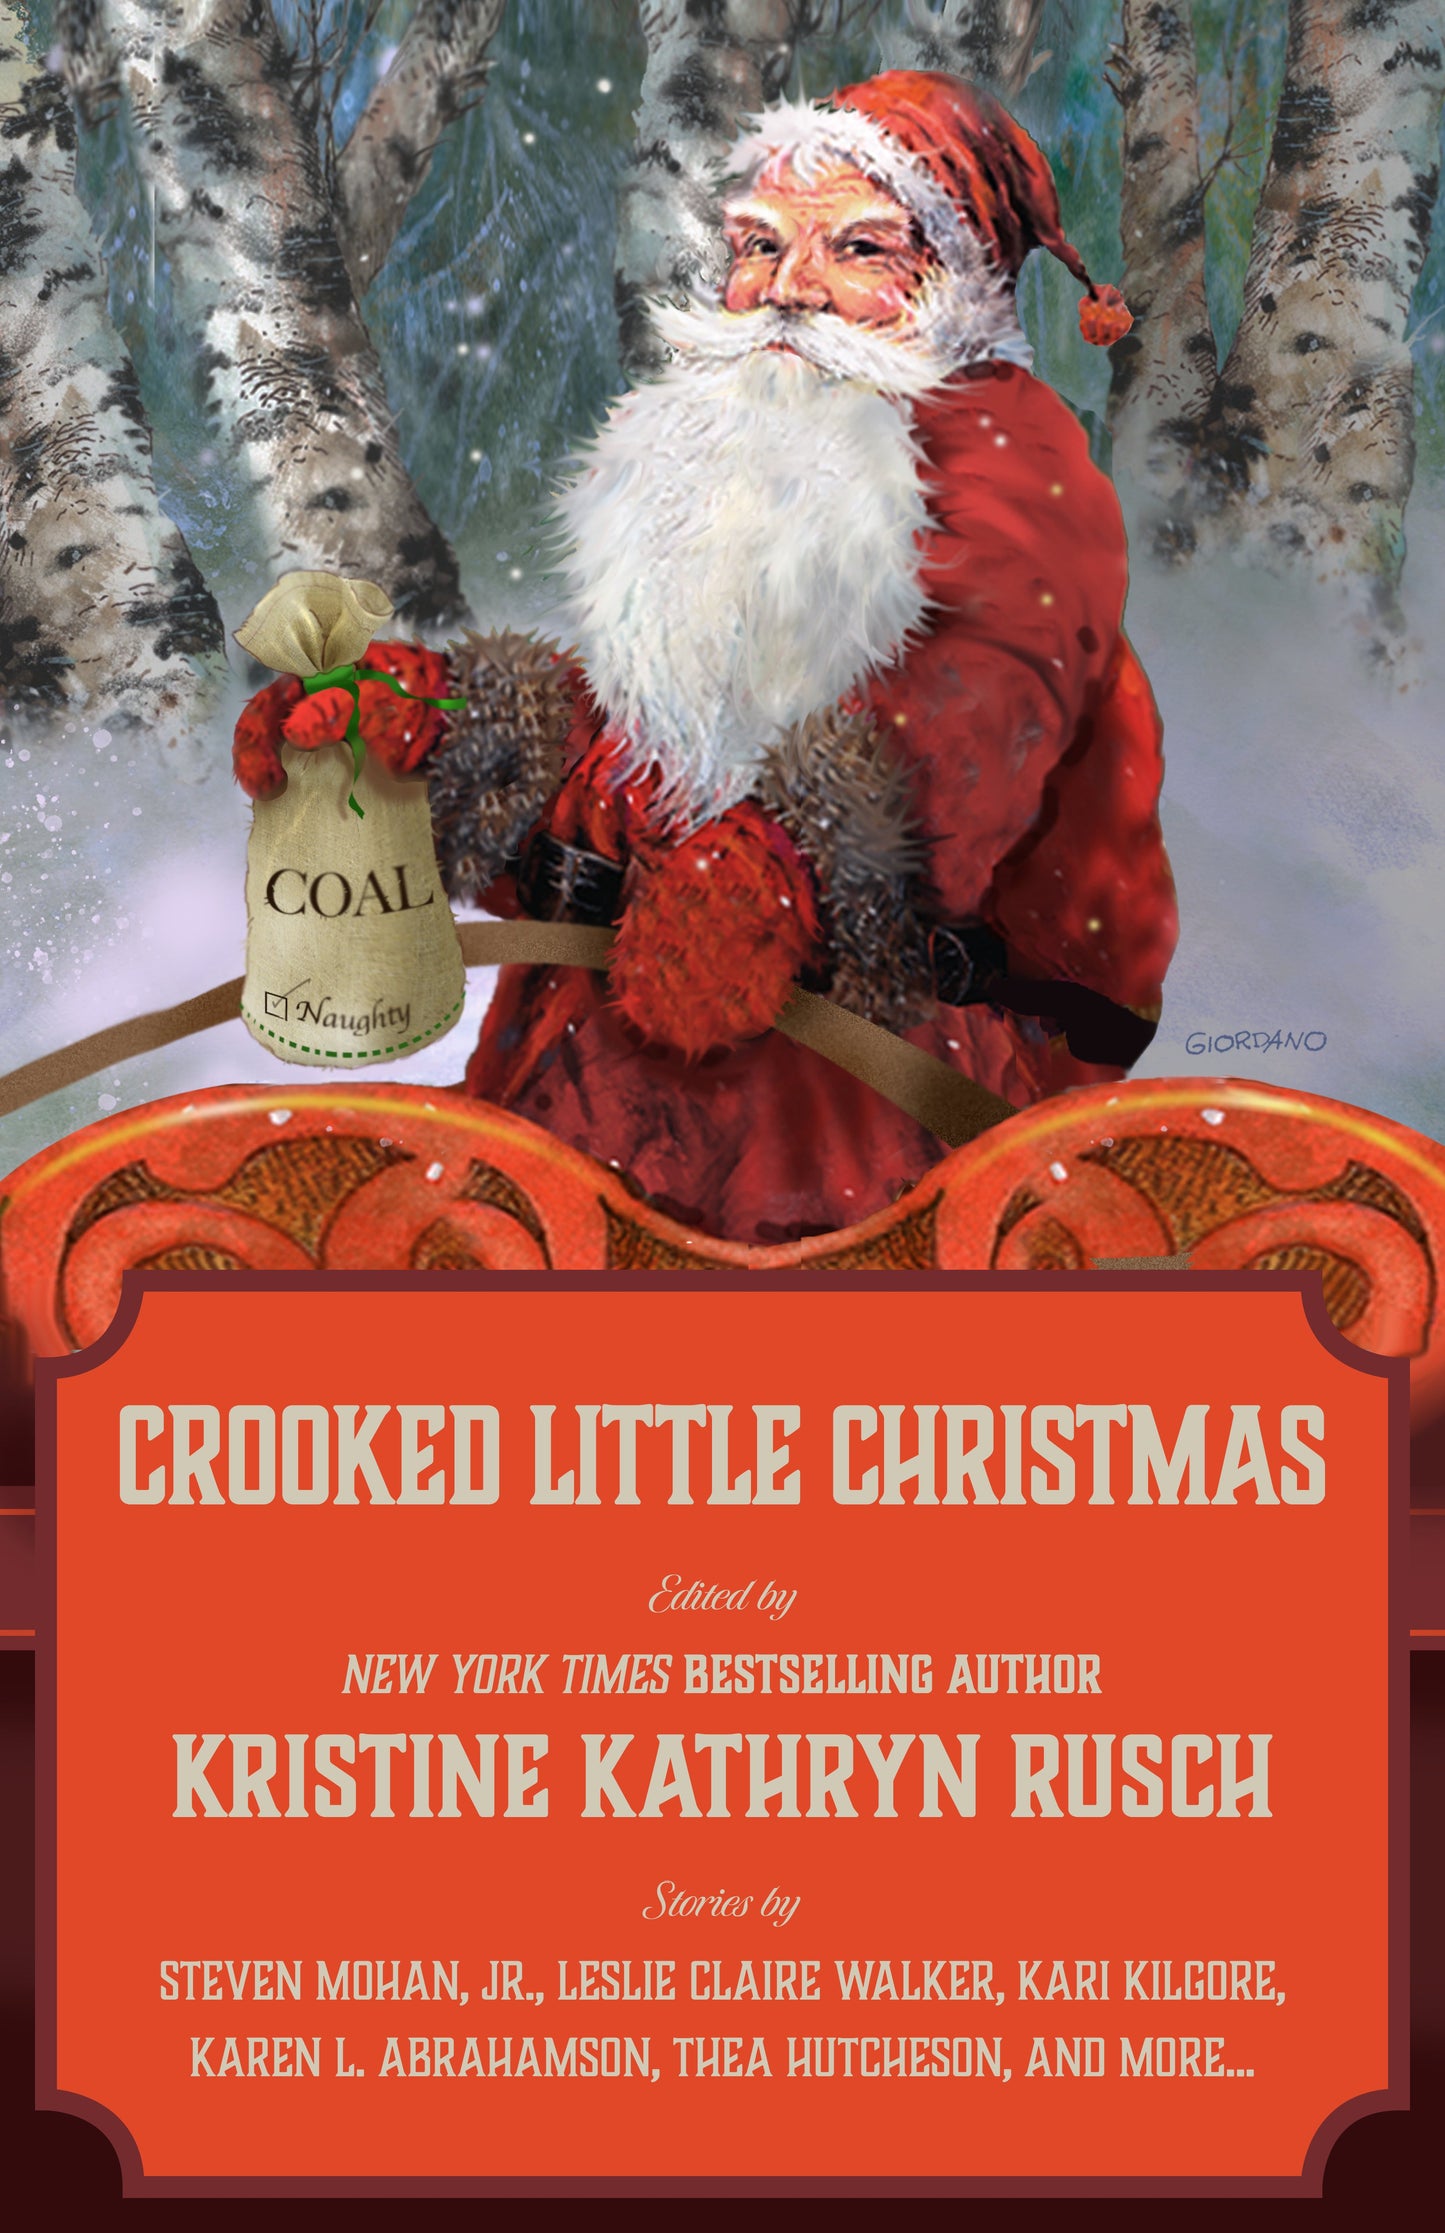 Crooked Little Christmas: A Holiday Anthology Edited by Kristine Kathryn Rusch